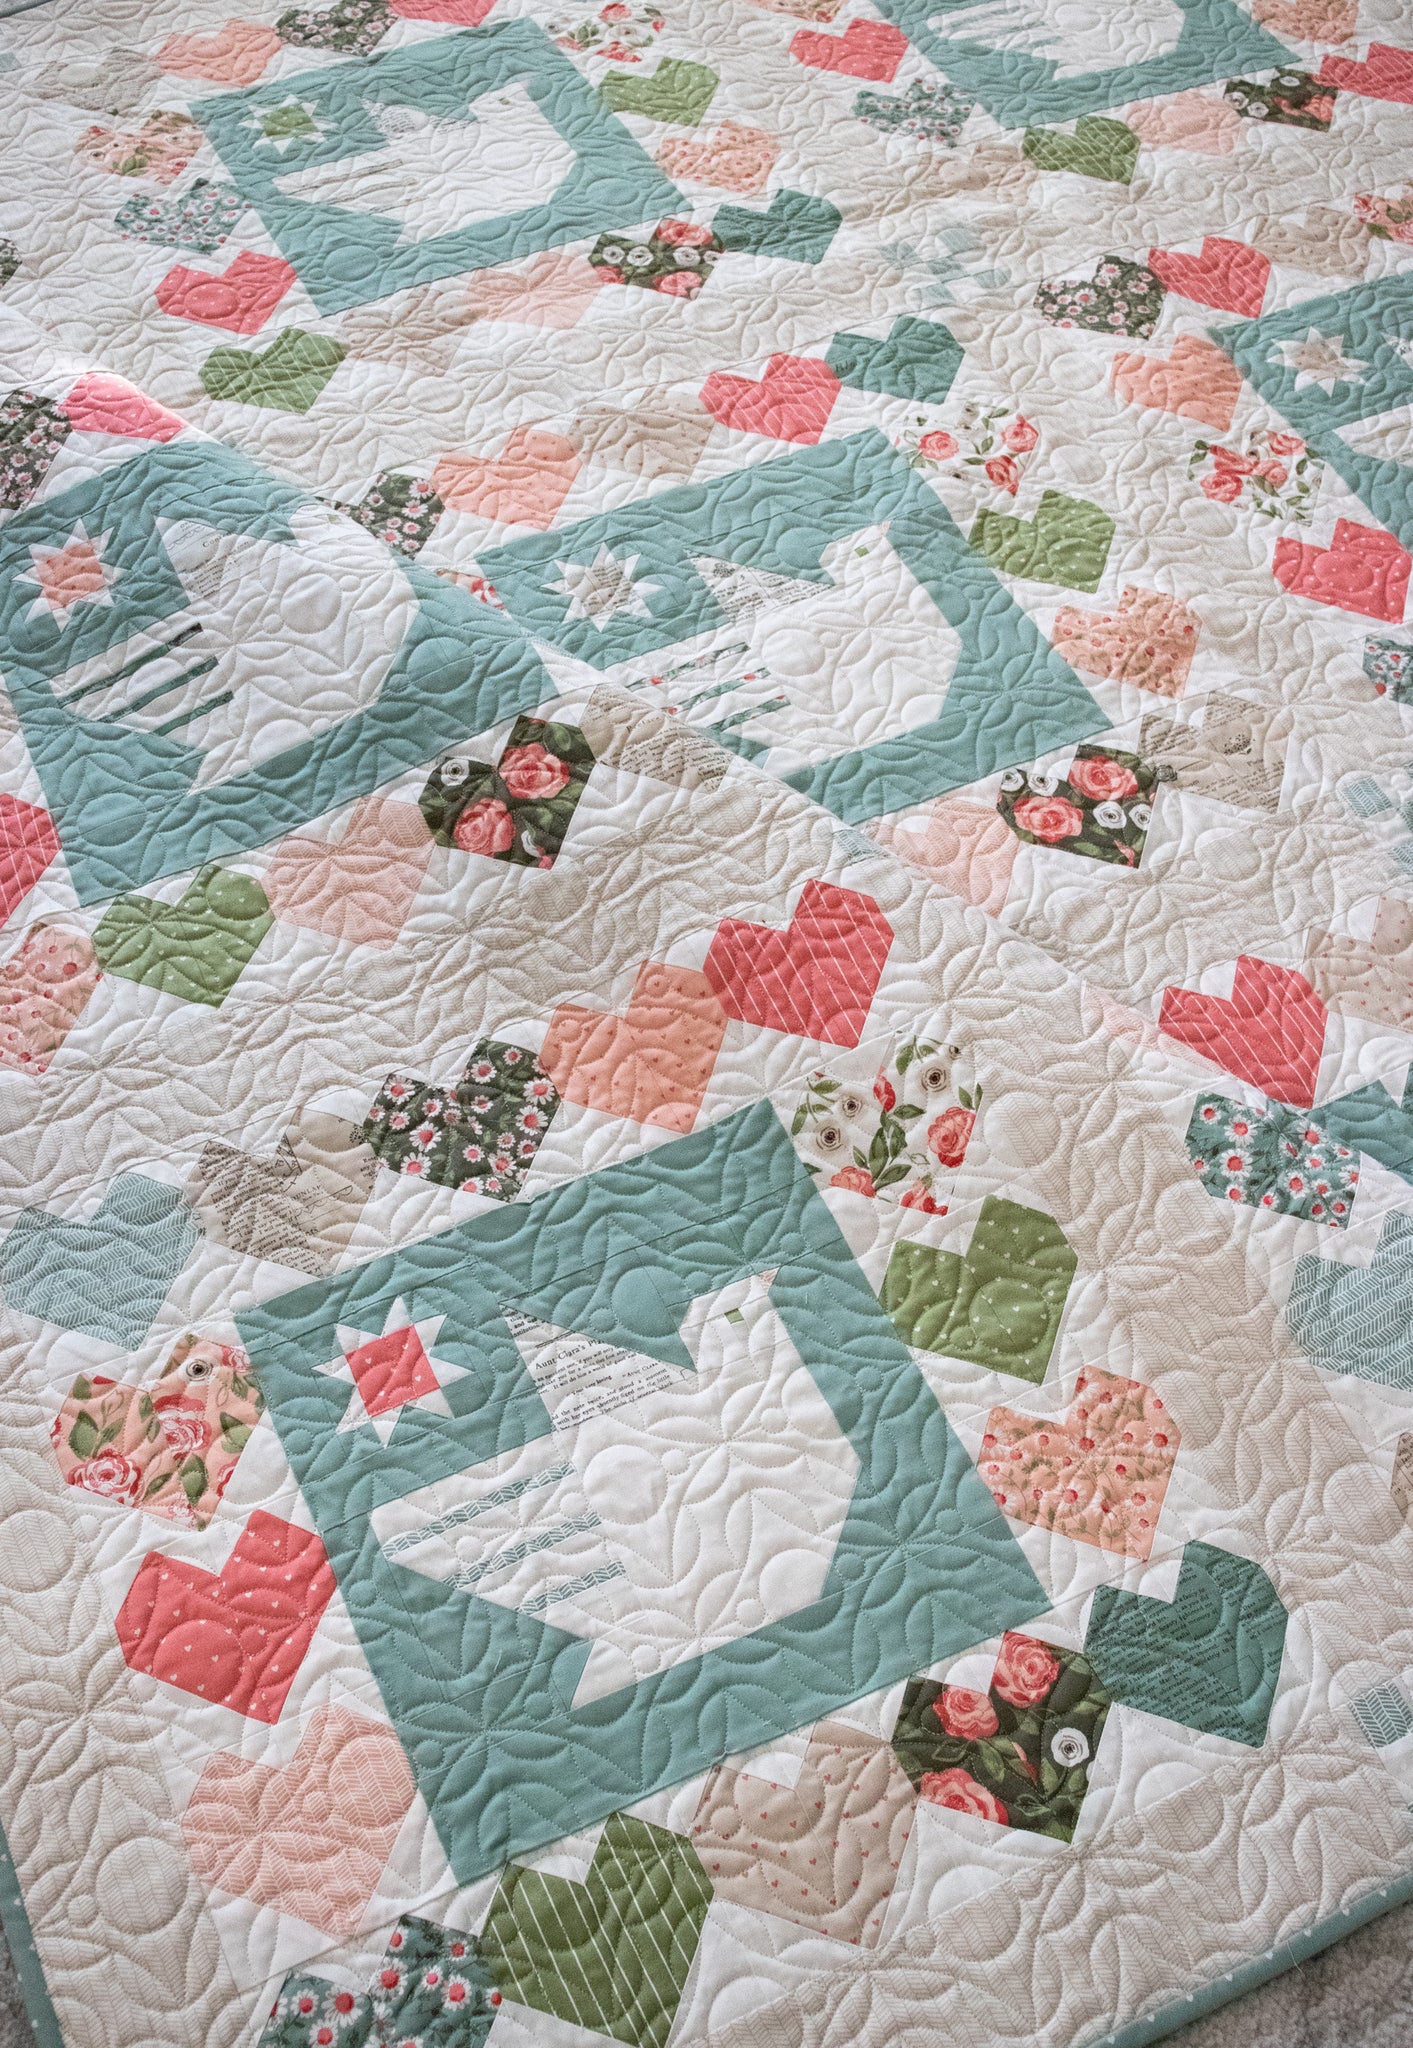 Lovey Dovey Impressions Quilt Pattern | It's Sew Emma #ISE-306